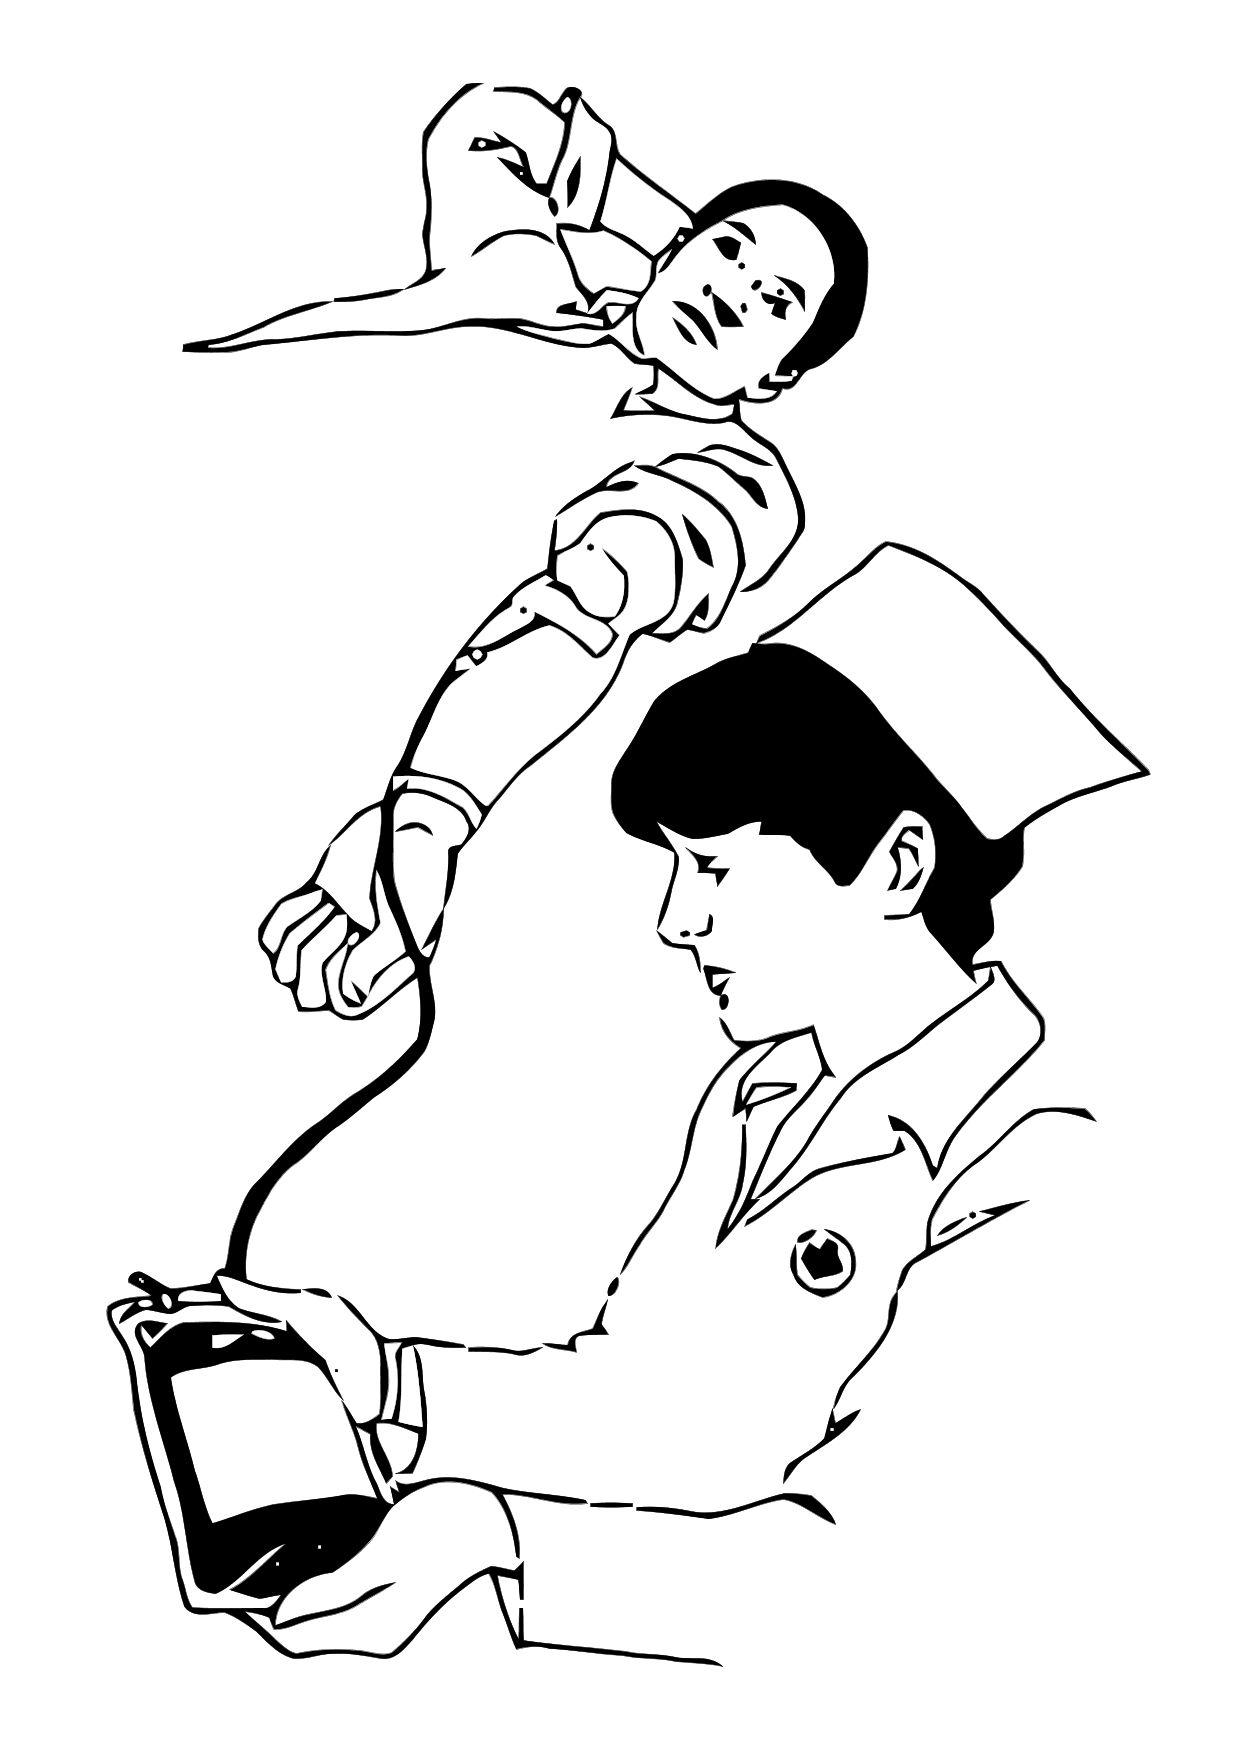 Coloring page give blood